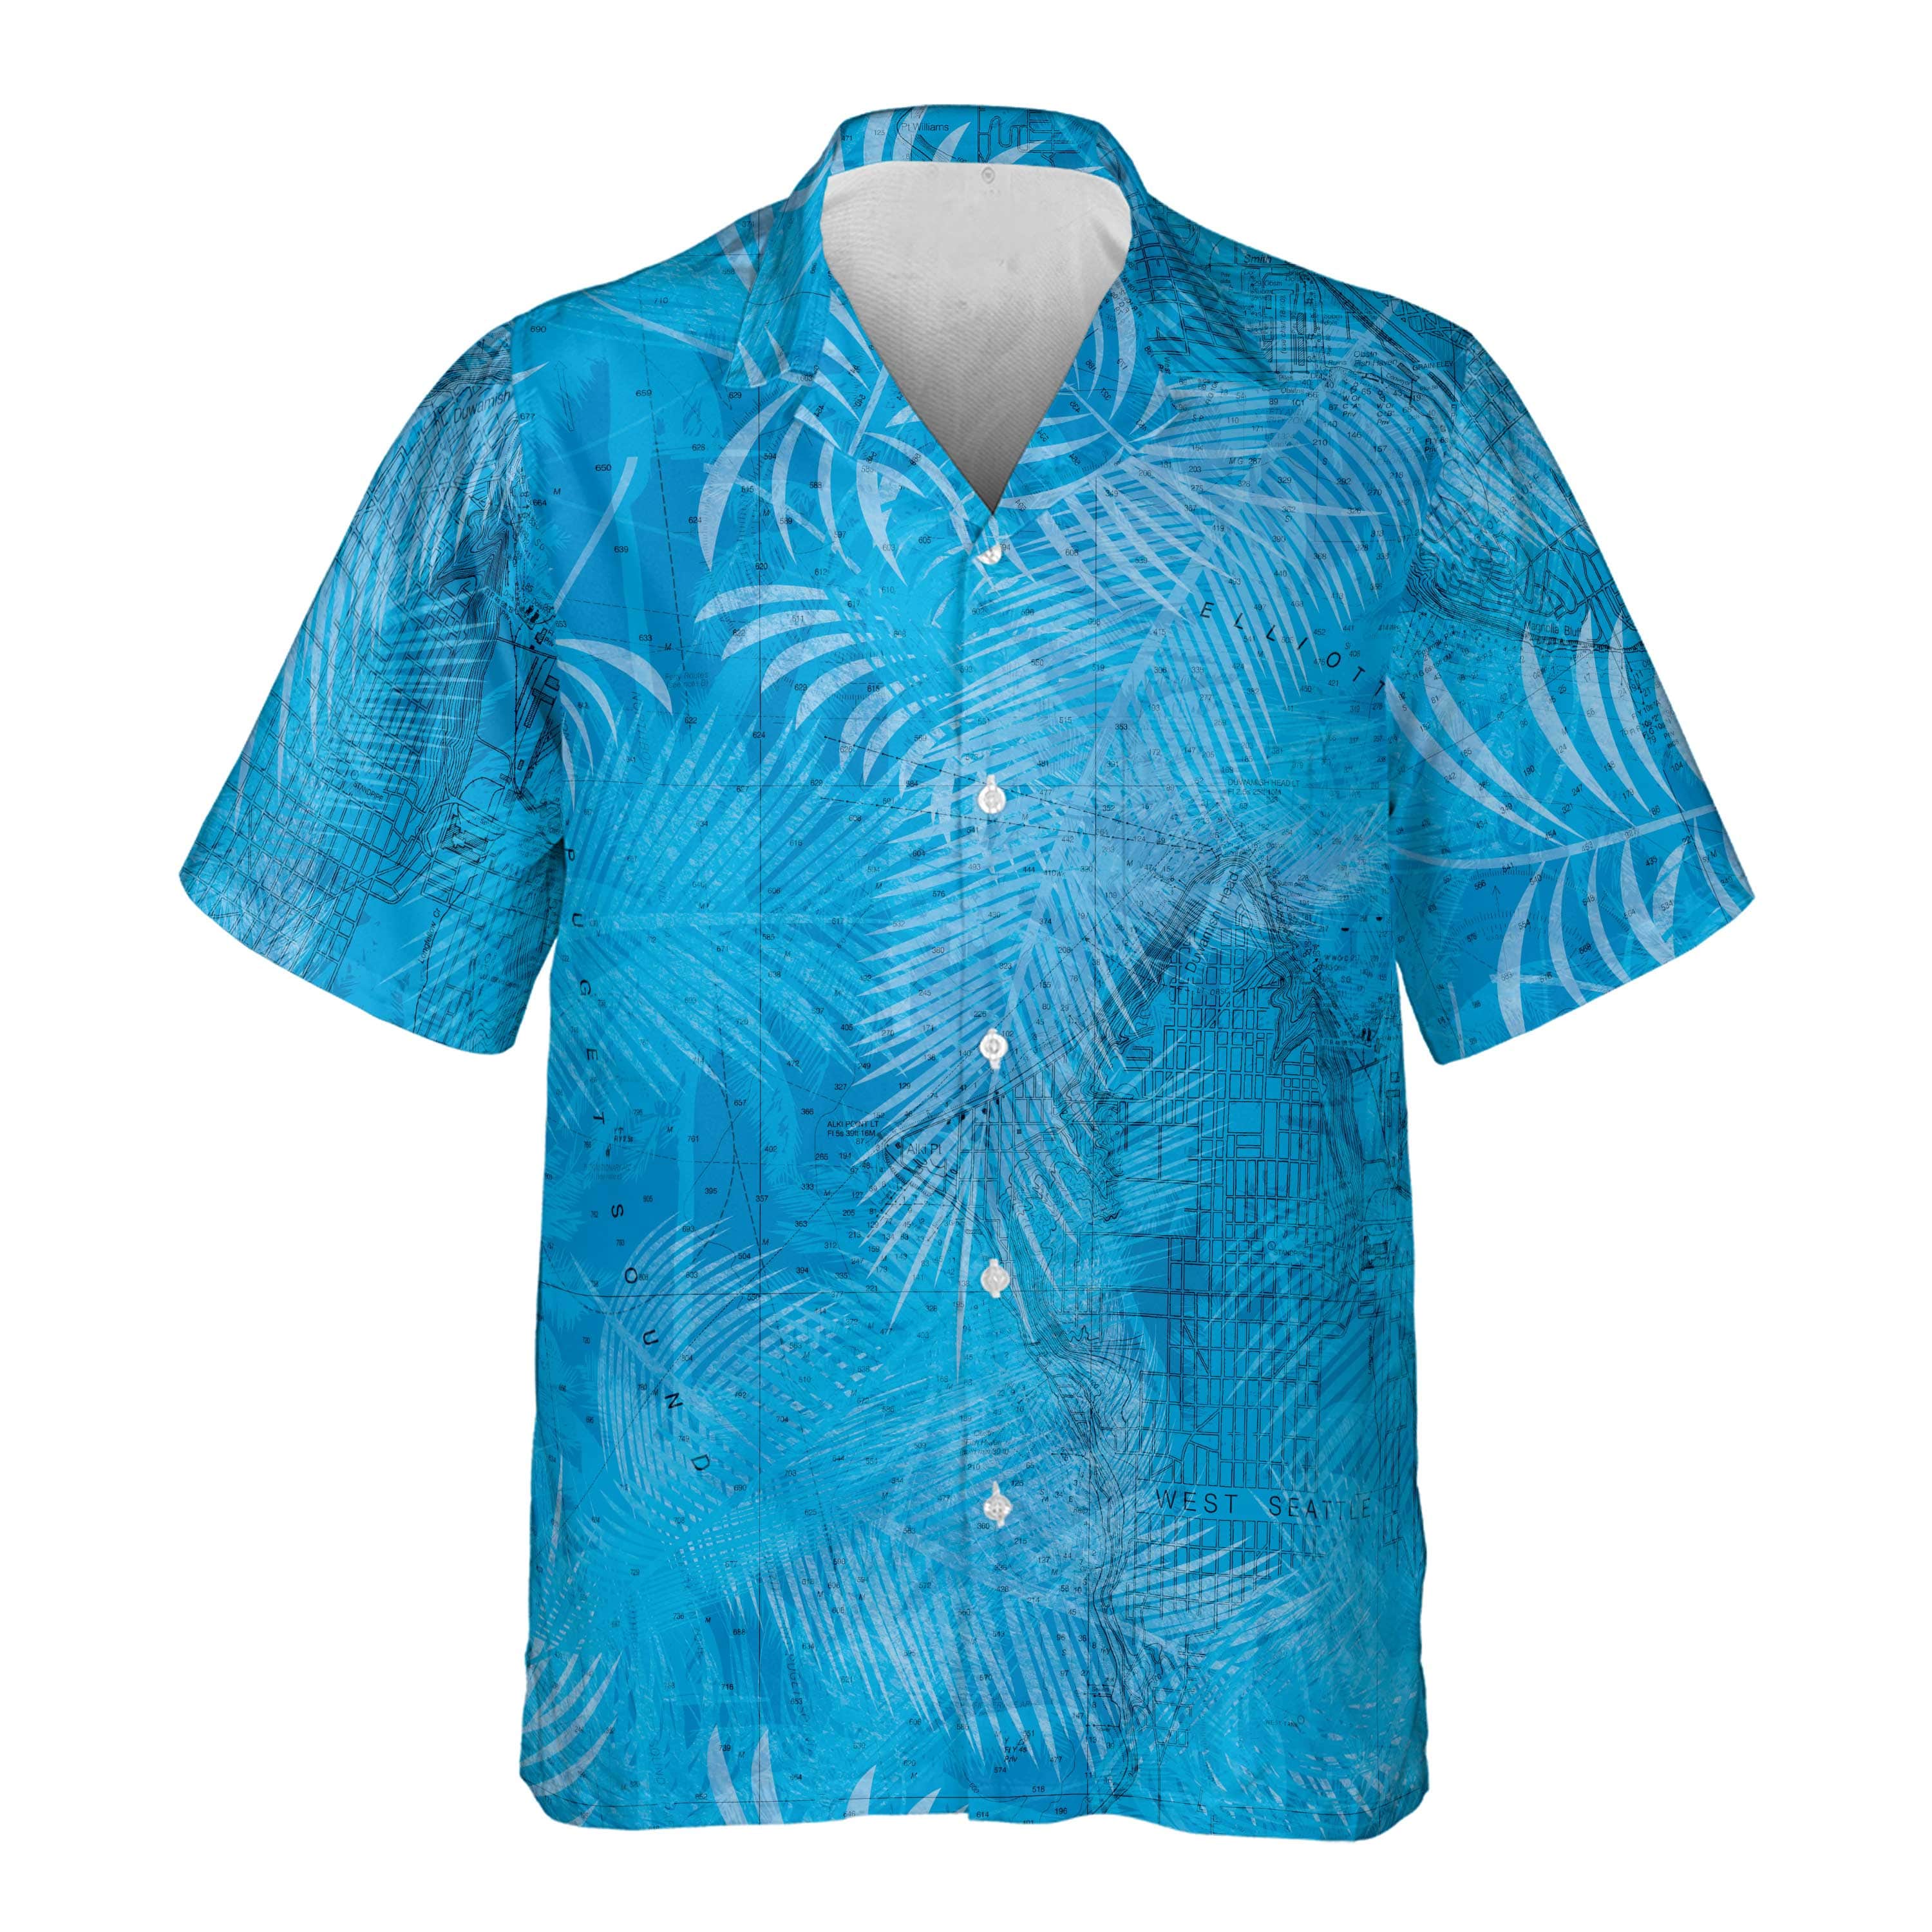 The Puget Sound and Seattle Blue Flowers Pocket Shirt – Top Deck Gear